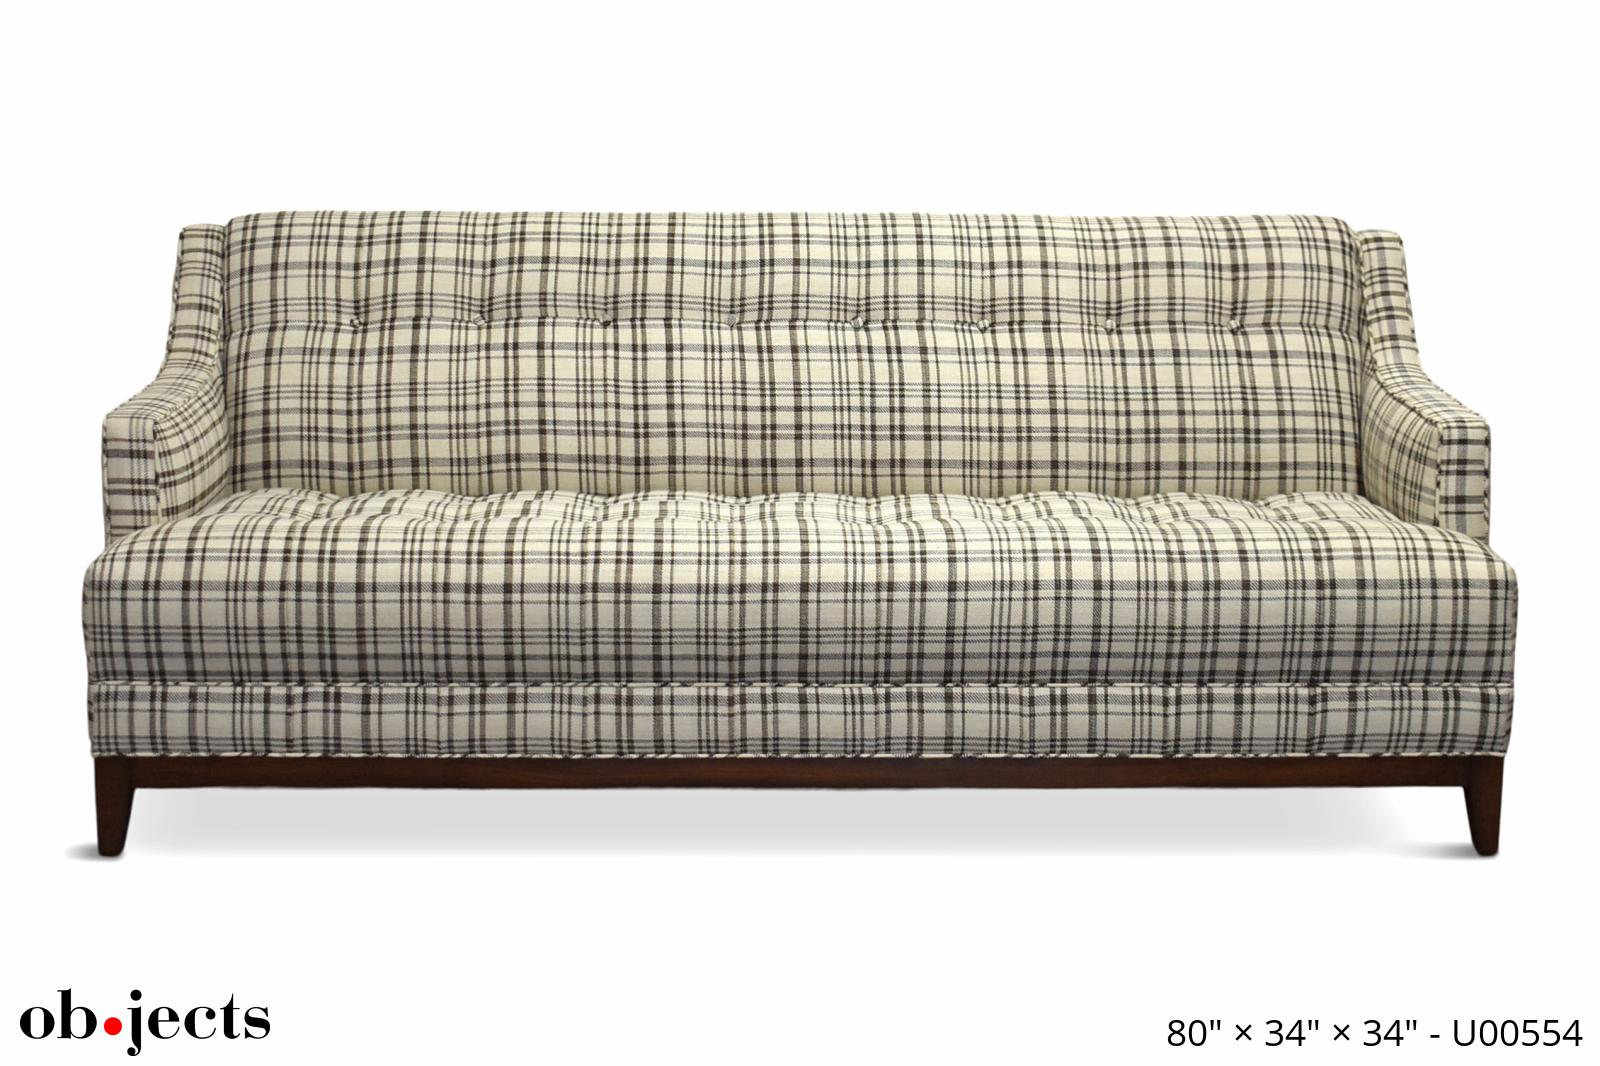 Sofa Horsehair Linen Beige/Brown Plaid w/Walnut Carriage | Ob•jects